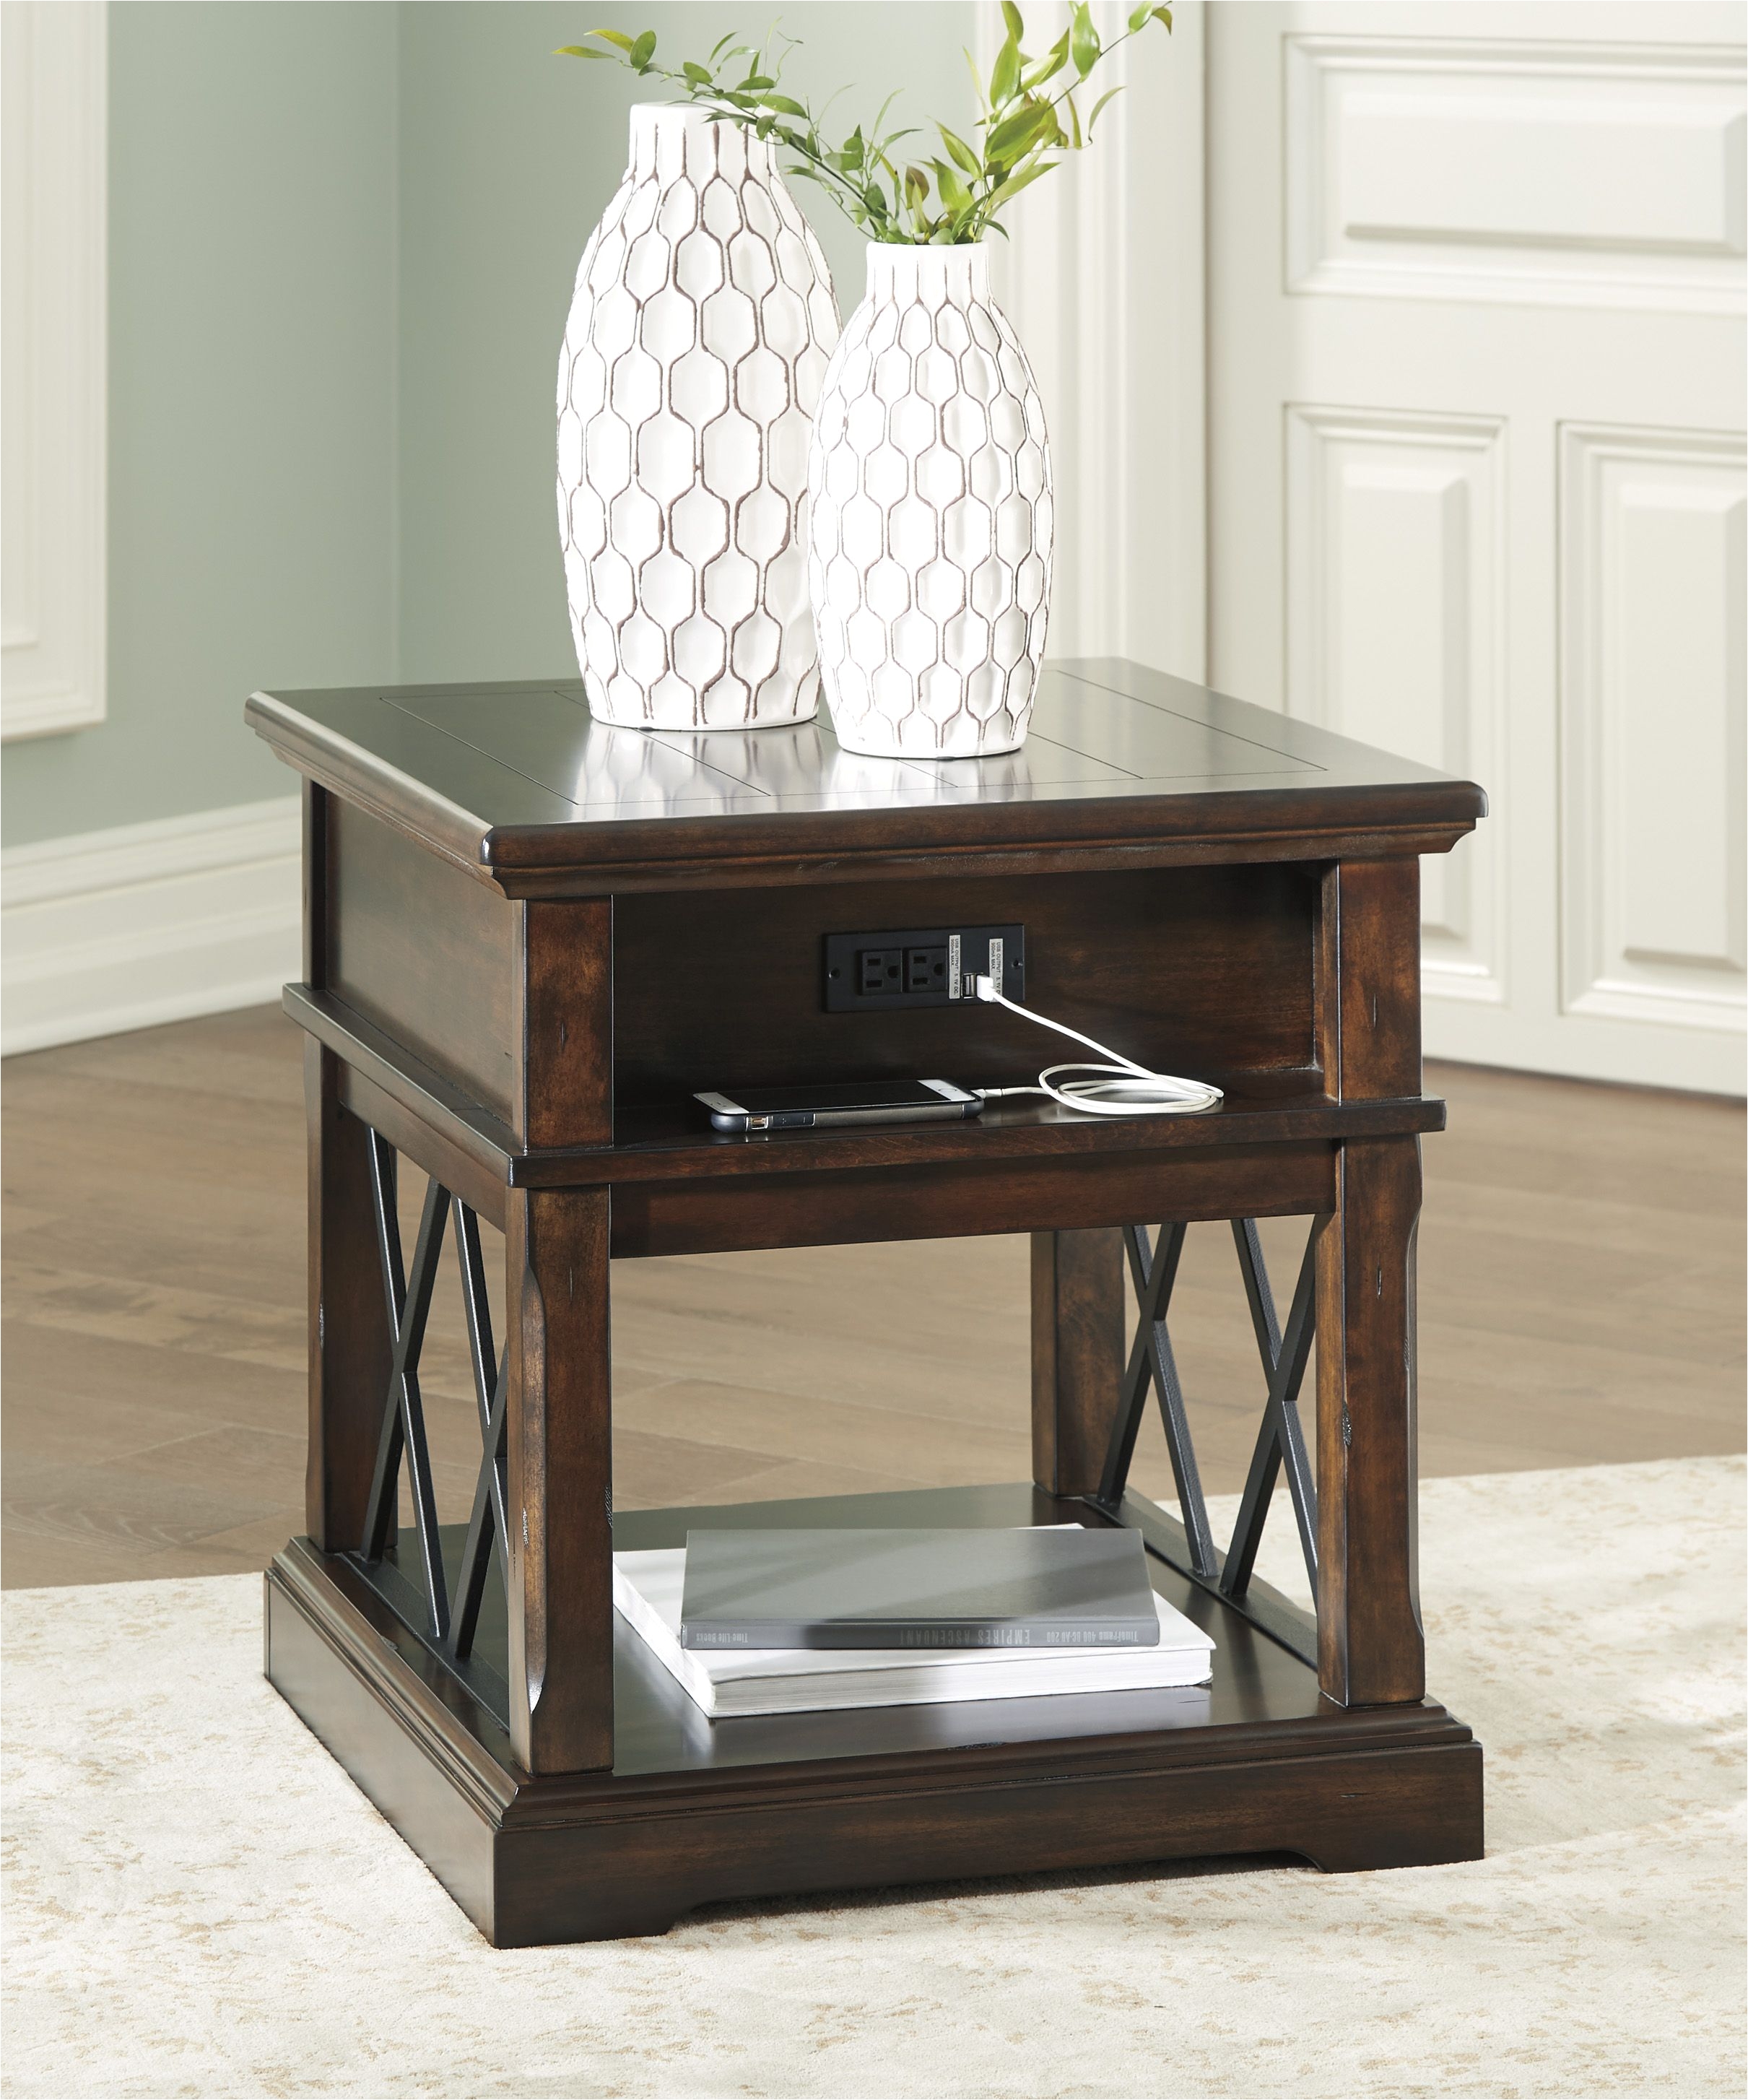 Wrought Iron End Tables Living Room 11 Traditional Coffee Tables and End Tables S